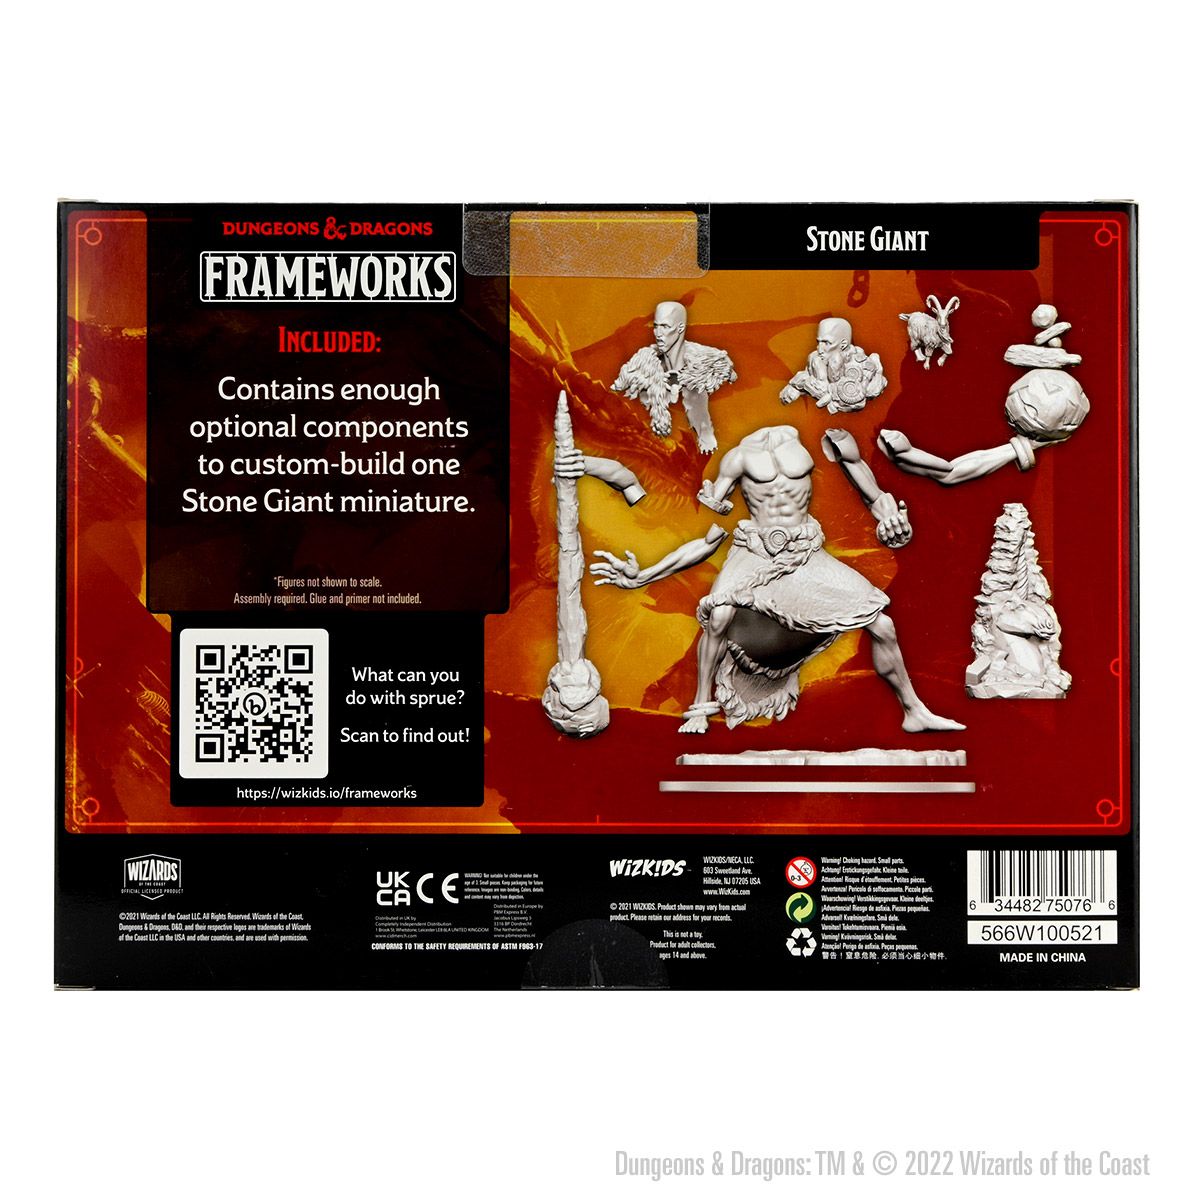 Dungeons & Dragons Frameworks: W01 Stone Giant - Bards & Cards